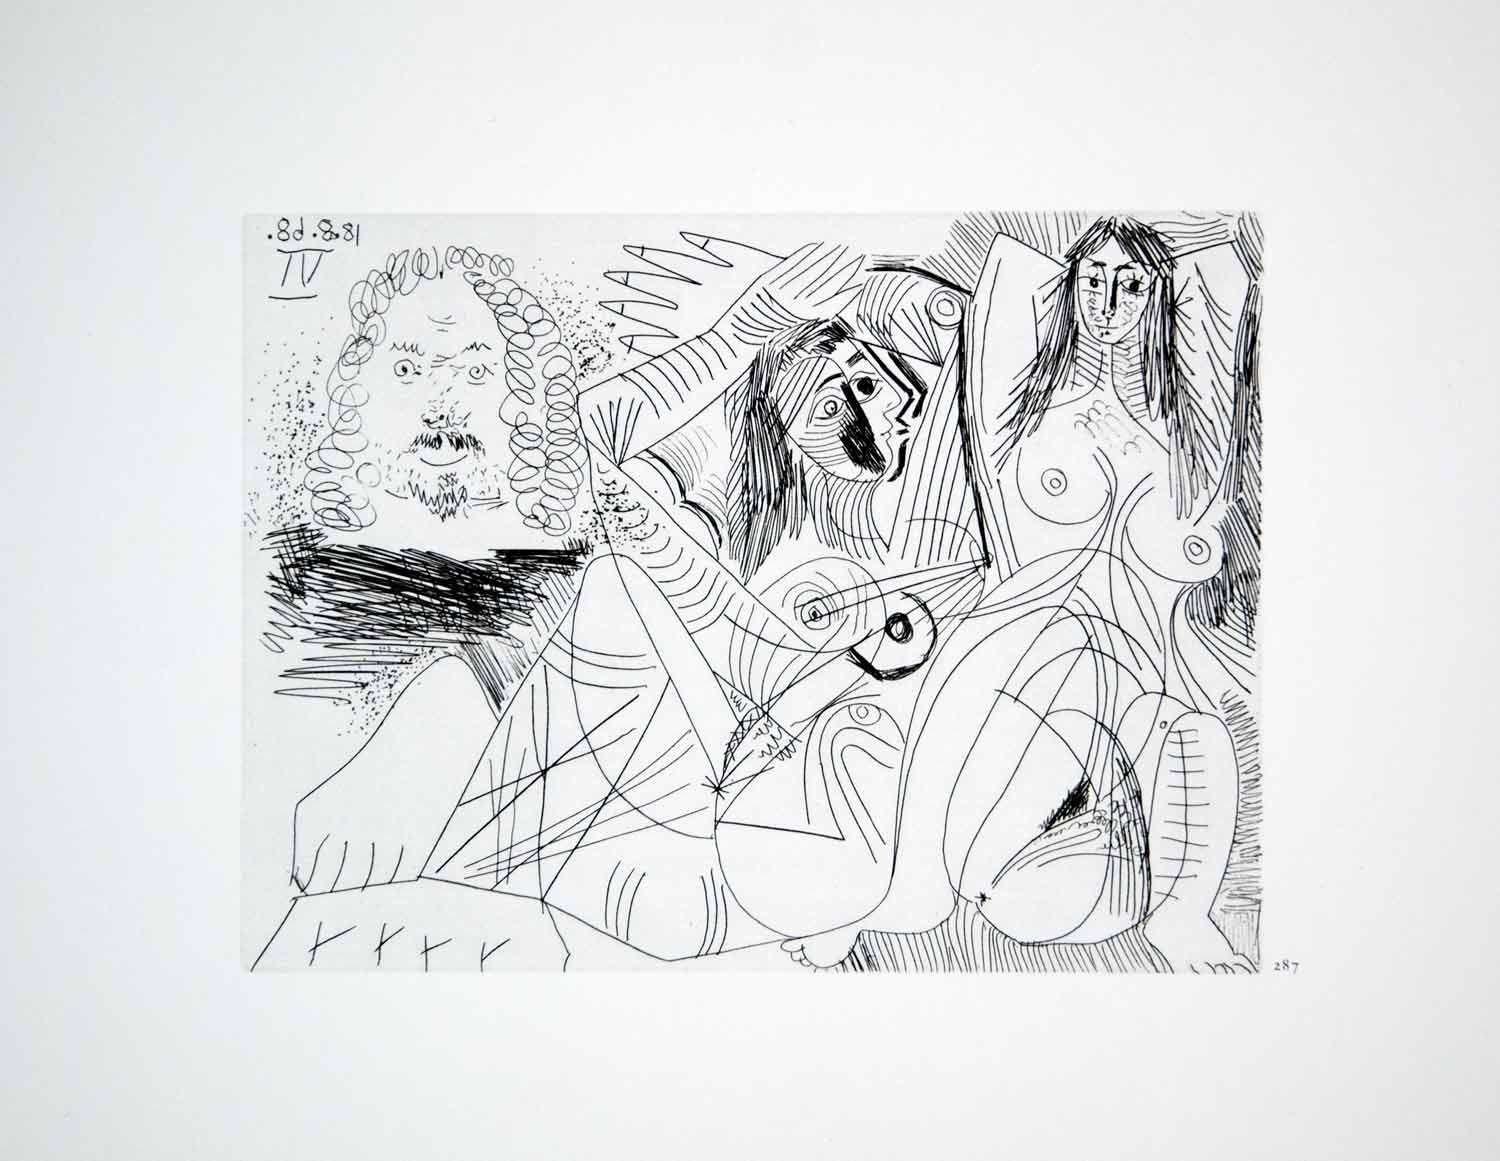 1970 Heliogravure Pablo Picasso Nudes Female Figures Erotic Abstract Art P347B